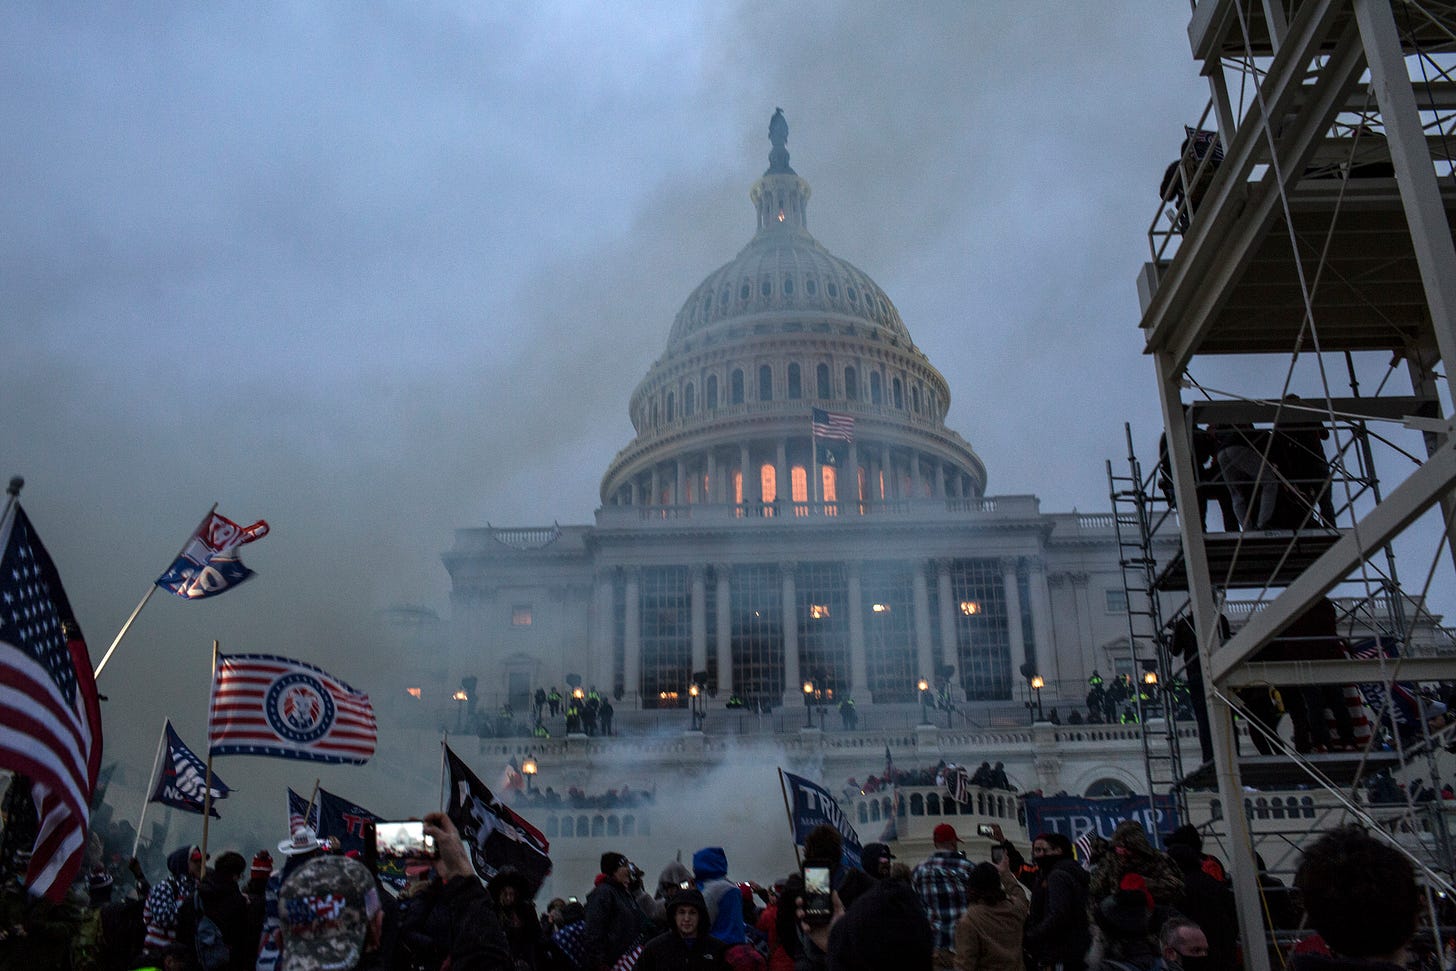 : Security forces respond with tear gas after the US President Donald Trump's supporters breached the US Capitol security. Pro-Trump rioters stormed the US Capitol as lawmakers were set to sign off Wednesday on President-elect Joe Biden's electoral victory in what was supposed to be a routine process headed to Inauguration Day. (Photo by Probal Rashid/LightRocket via Getty Images)